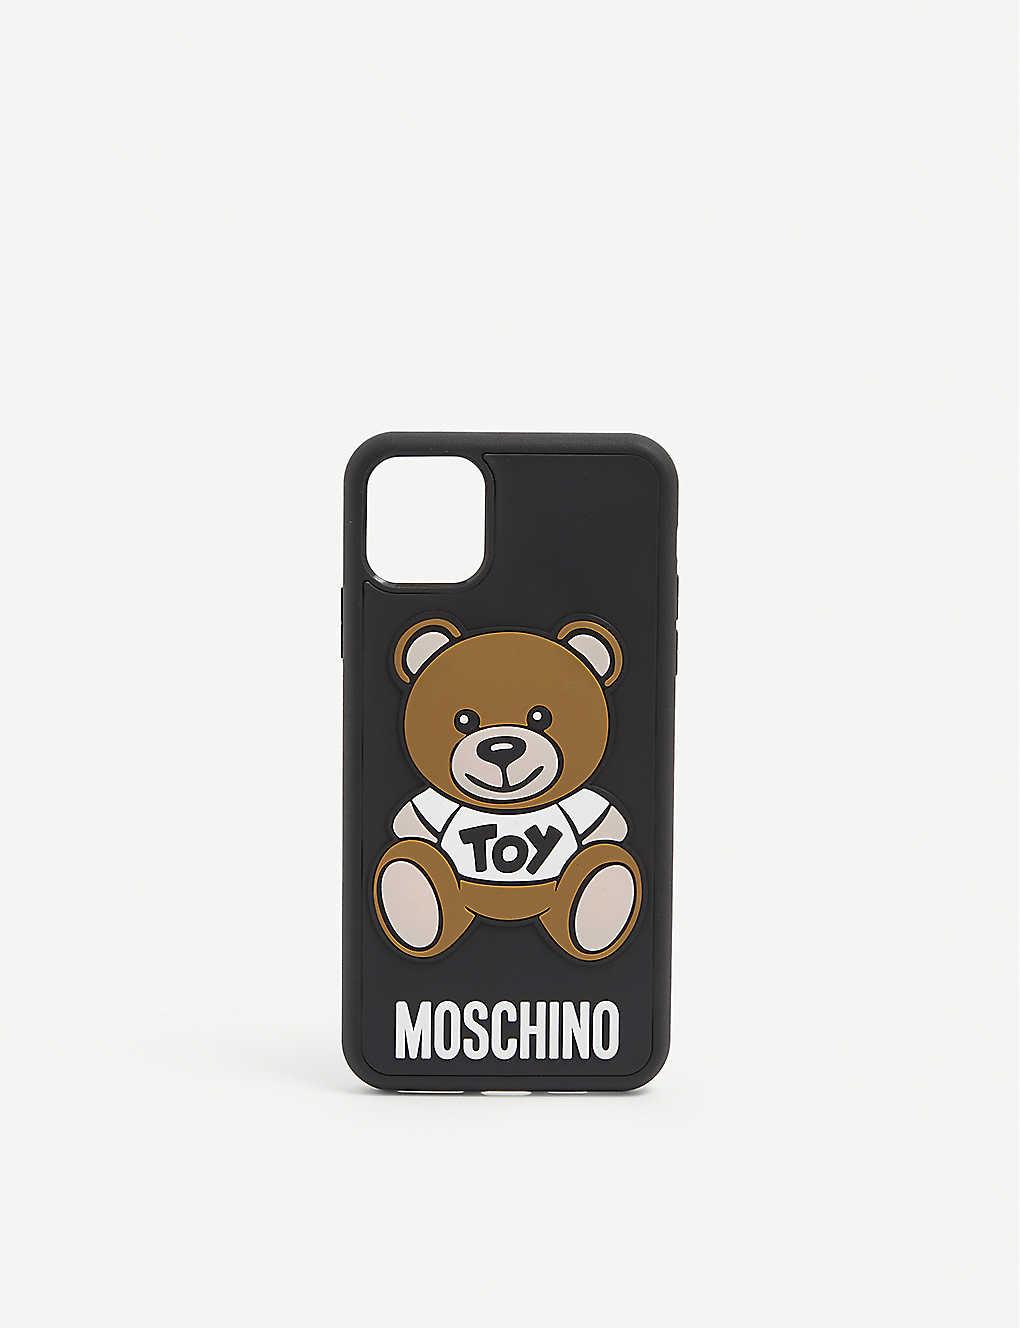 Moschino Teddy Toy Iphone 11 Max Case in Black - Lyst